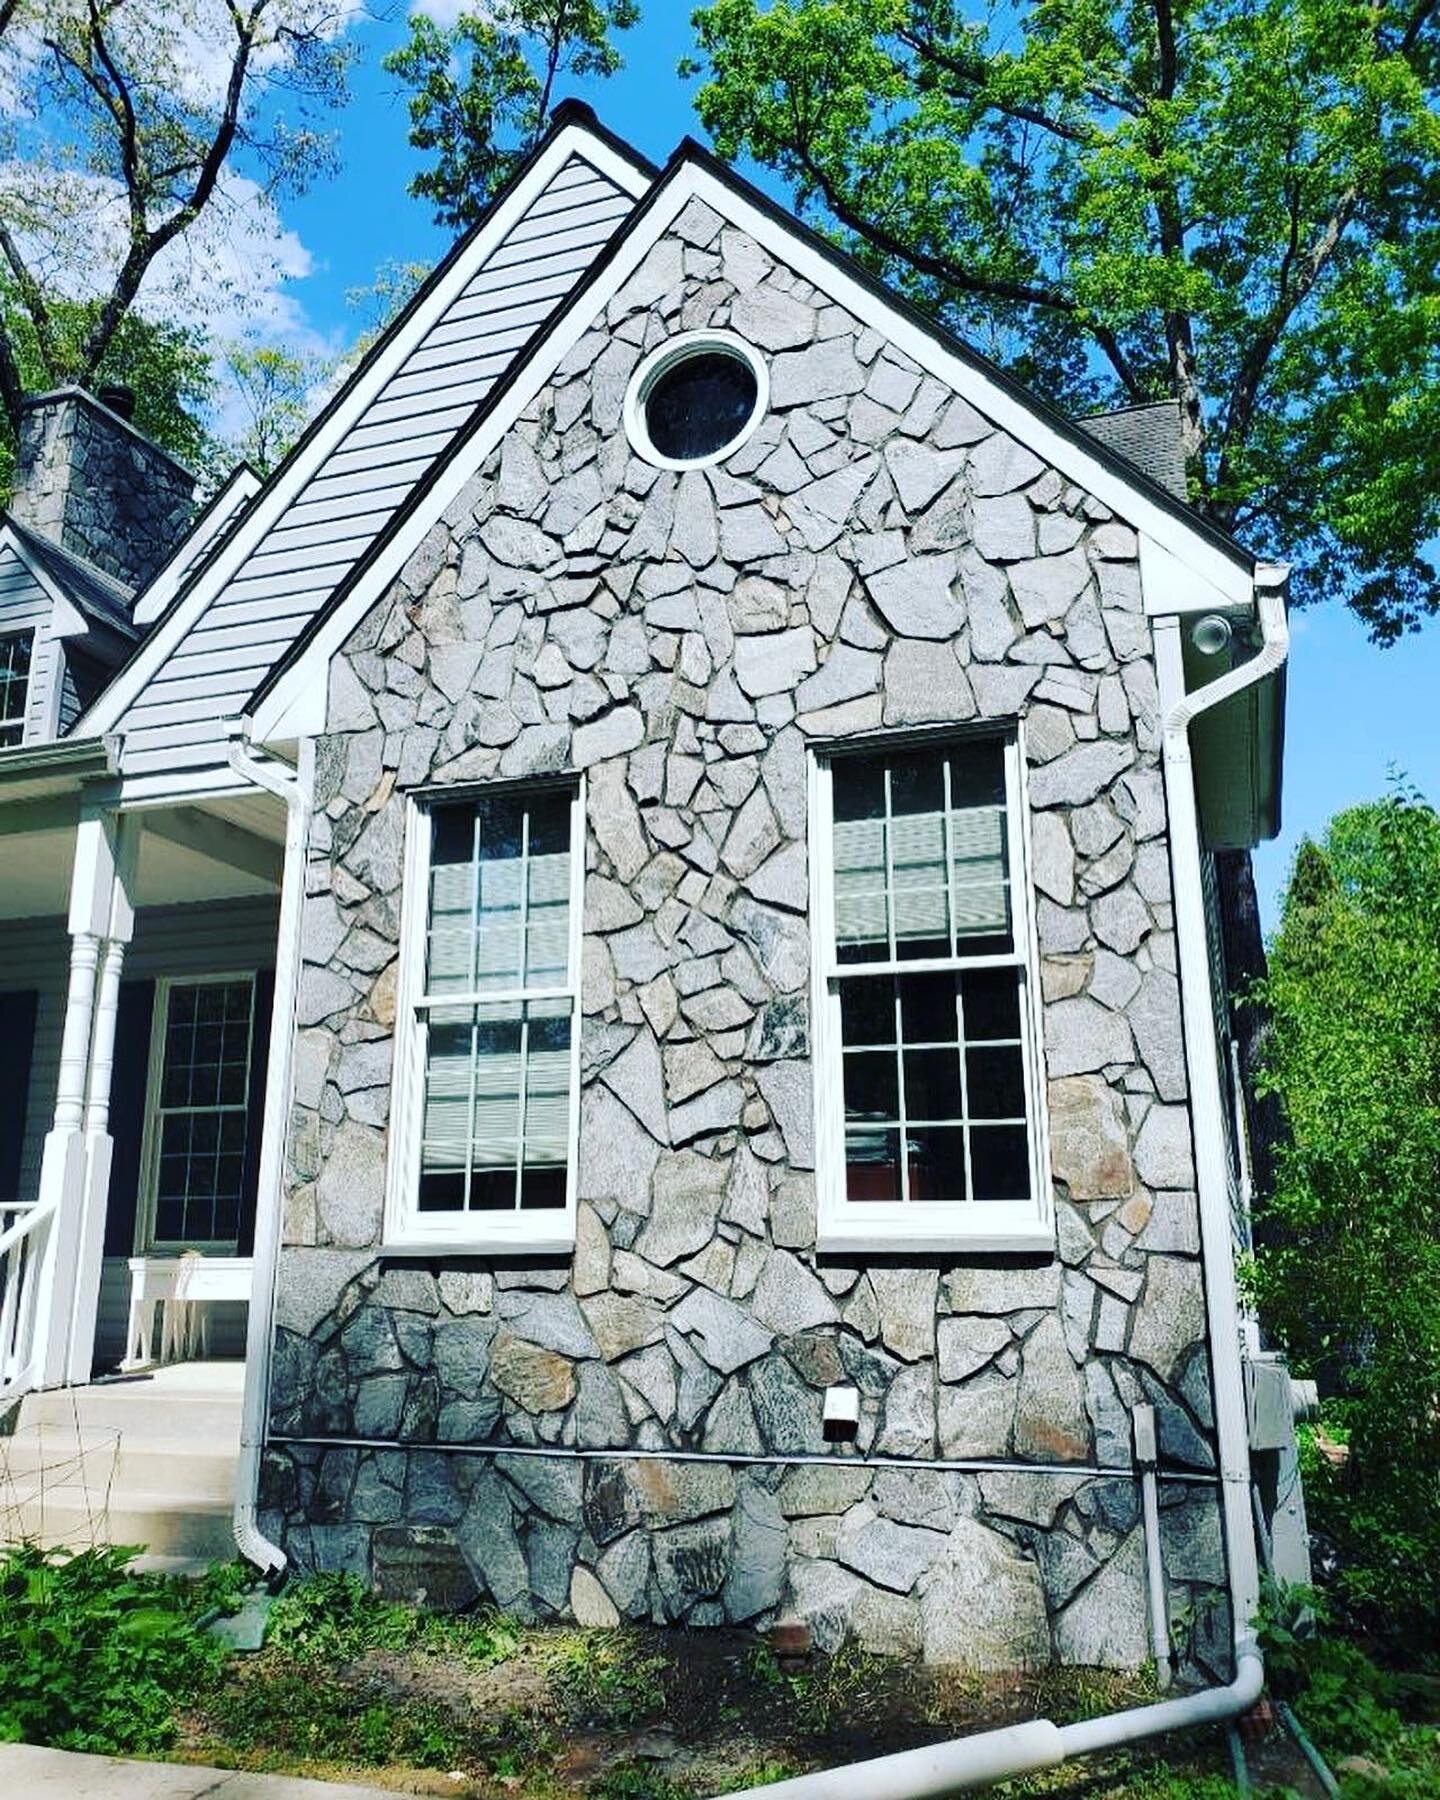 Upgrade of an exterior veneer with natural thin stone in dove gray. Scroll for before snapshot. Several stone color options are available. Contact us for a free project consultation and estimate for your next project. #homesweethome #welcomehome #cur